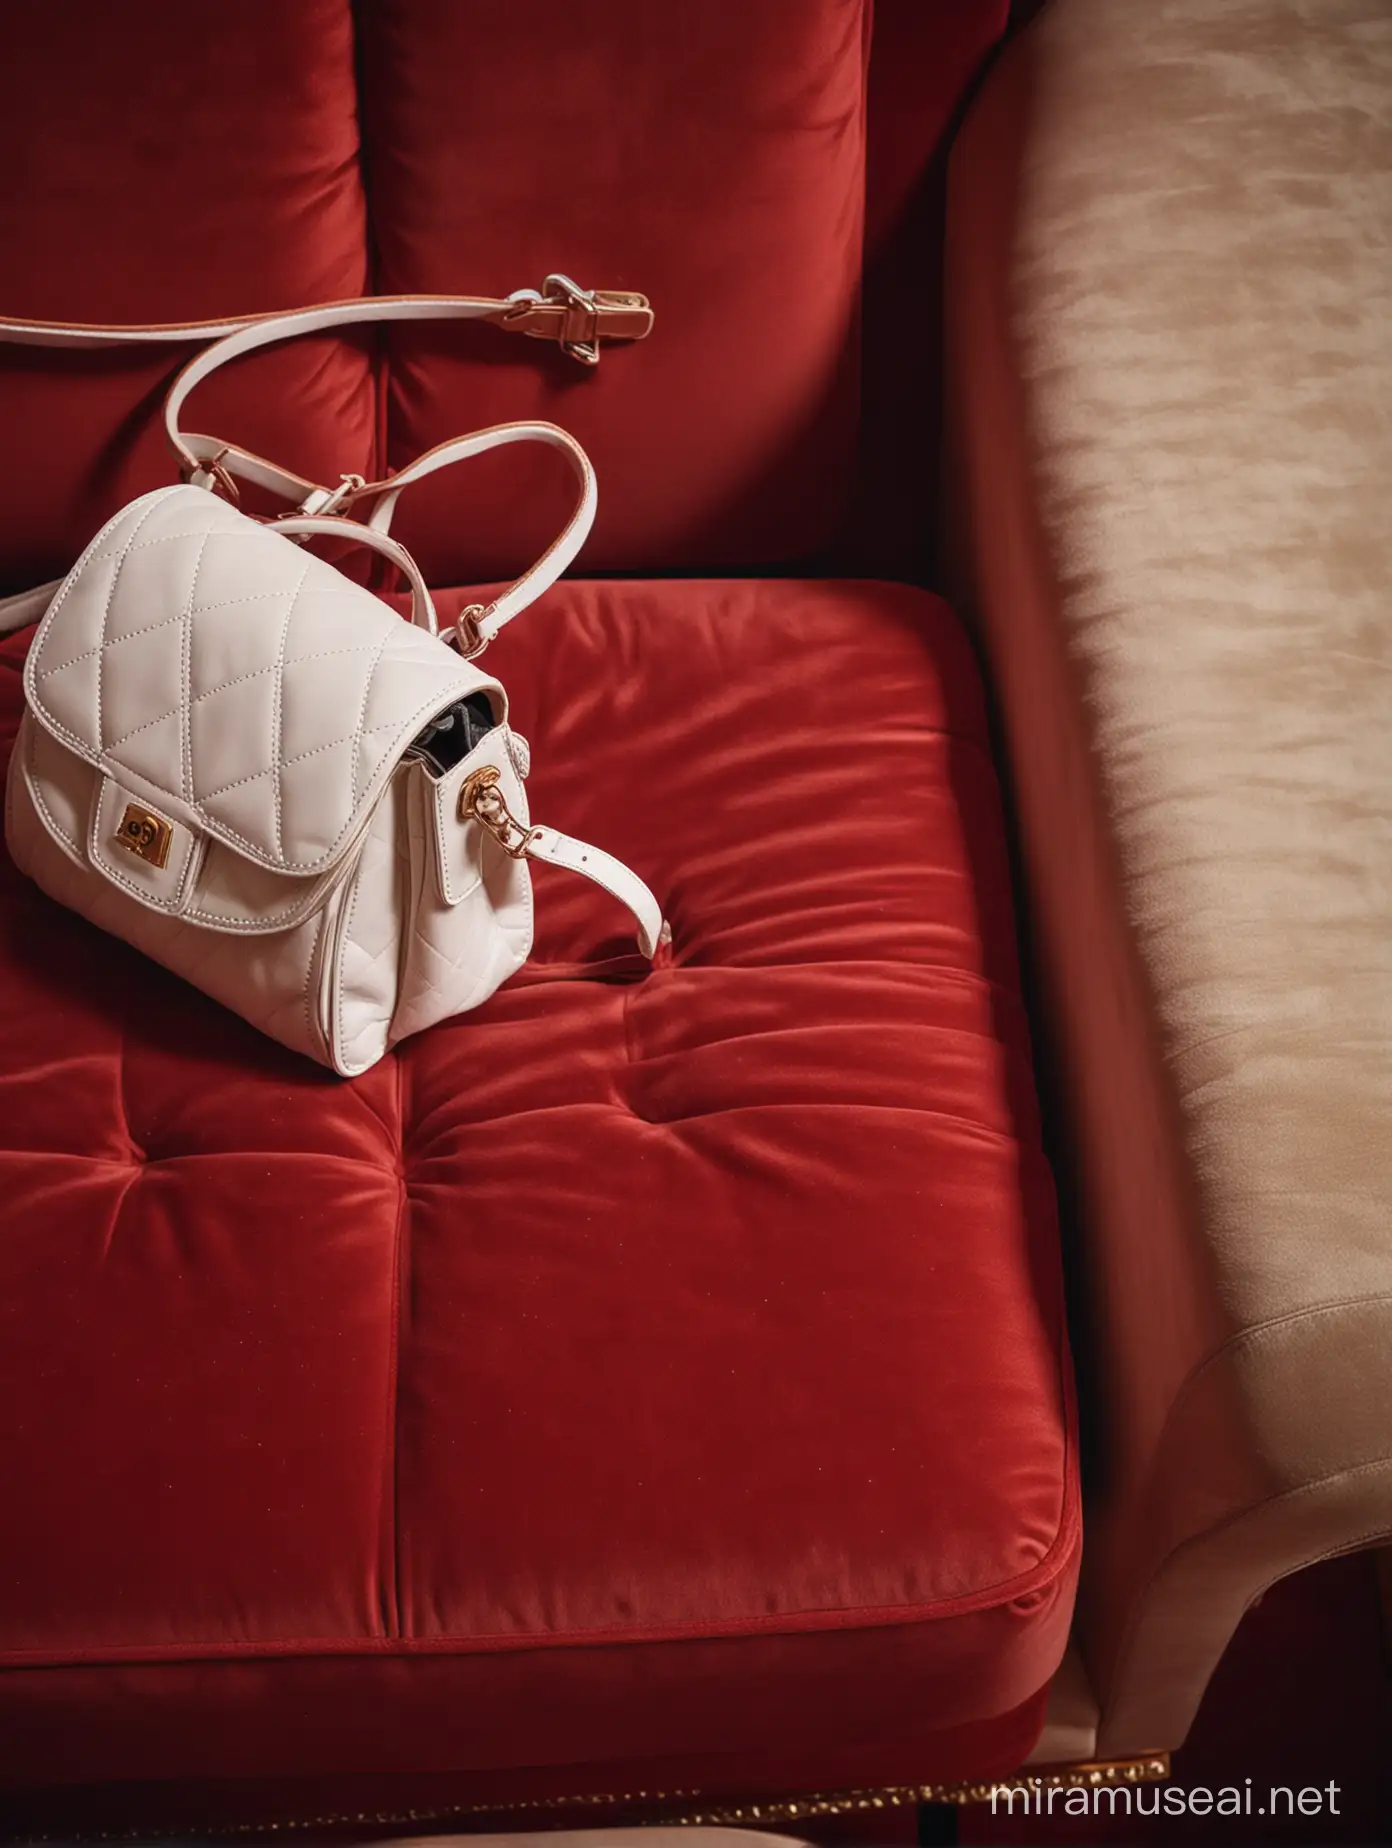 Chic White Leather Bag on Red Velvet Cinema Chair Top View Catalog Photo